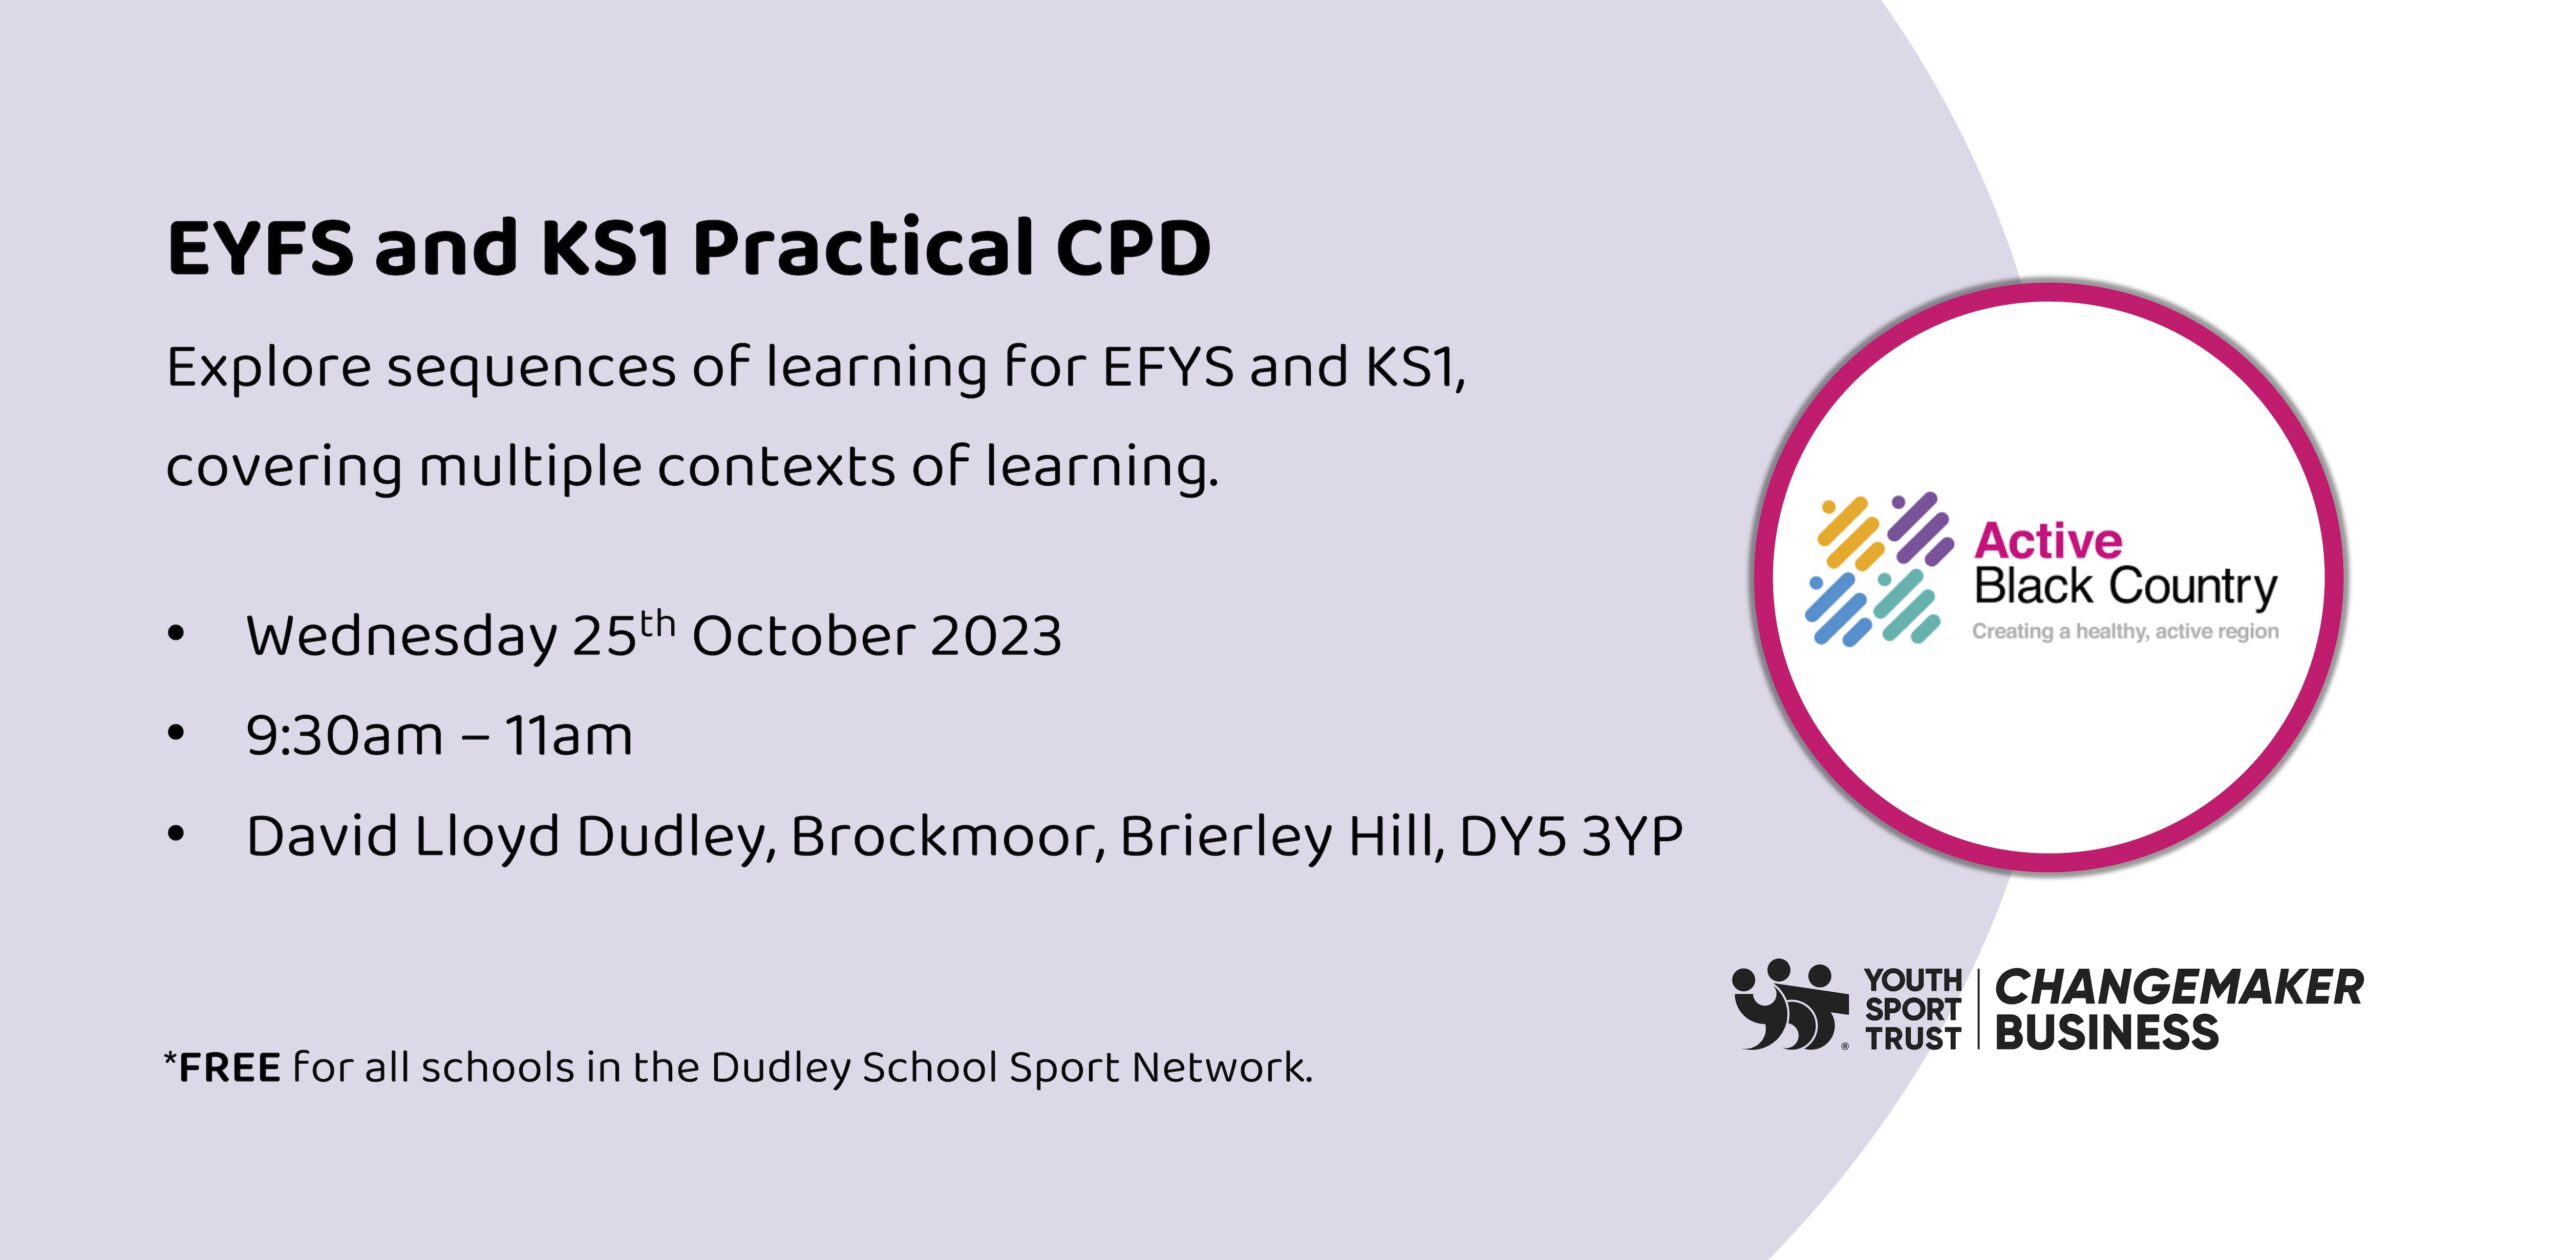 Dudley | EYFS and KS1 Practical CPD